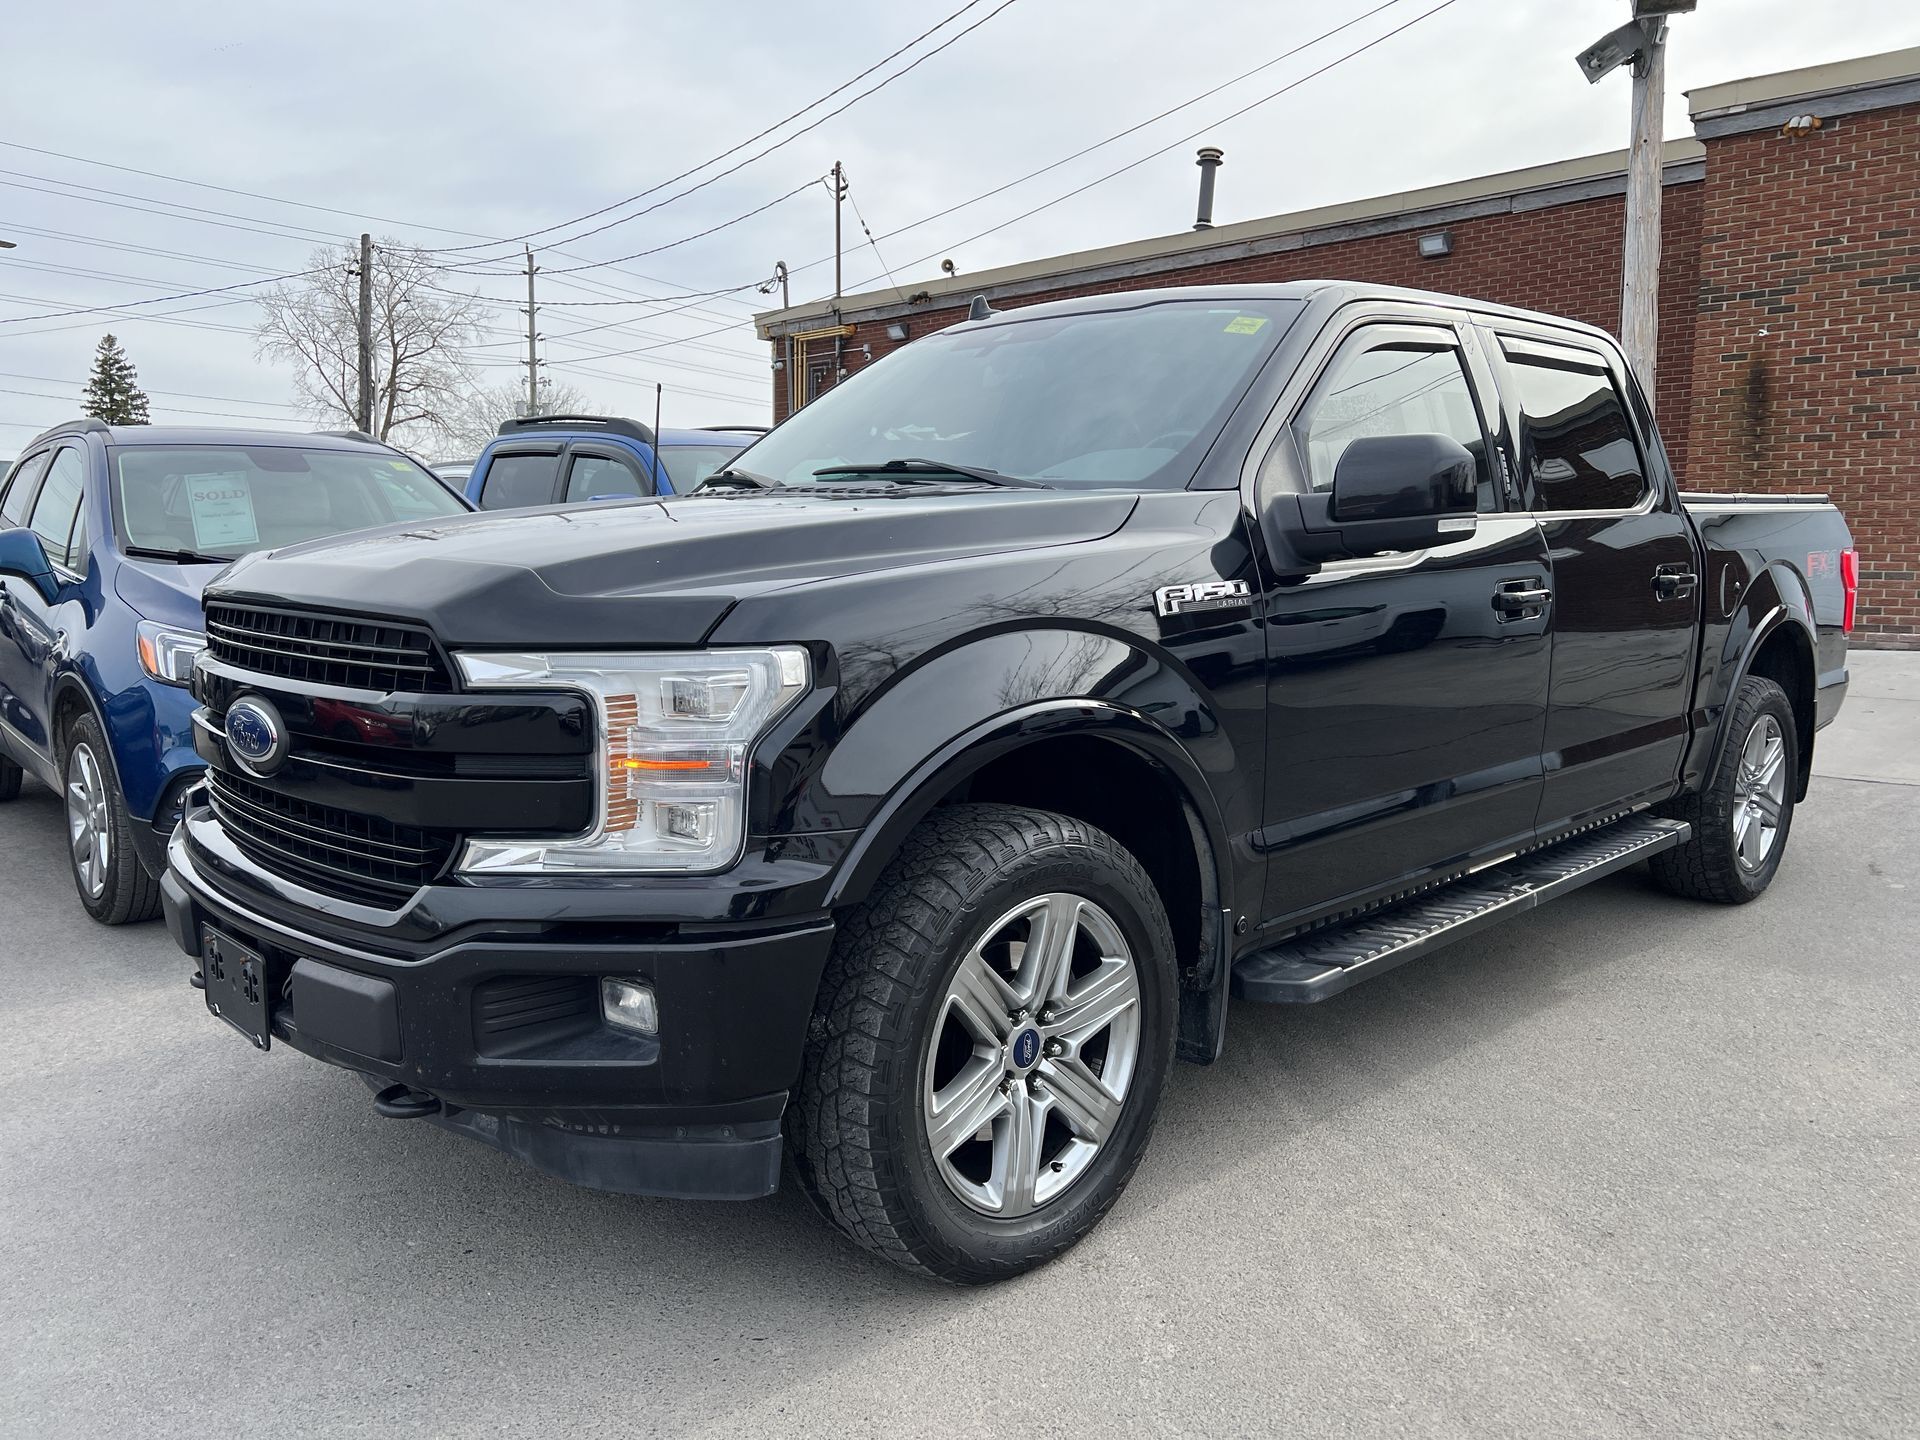 2018 Ford F-150 LARIAT SPORT 4x4| PANOROOF| LEATHER| 360 CAM| CREW